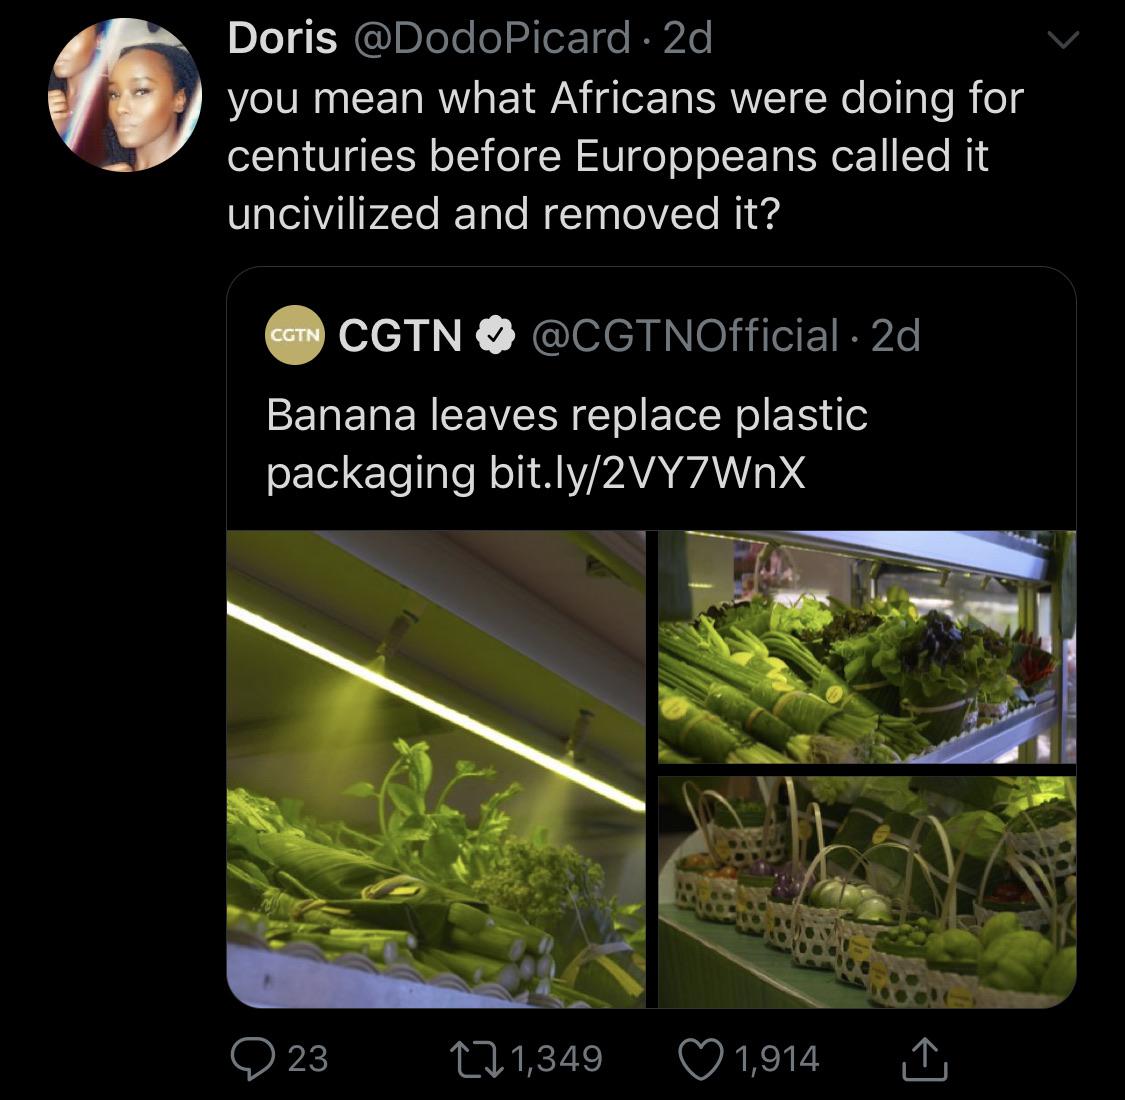 grass - Doris 2d you mean what Africans were doing for centuries before Europpeans called it 'uncivilized and removed it? Cctn Cgtn 2d Banana leaves replace plastic packaging bit.ly2VY7WnX Q23 271,349 1,914